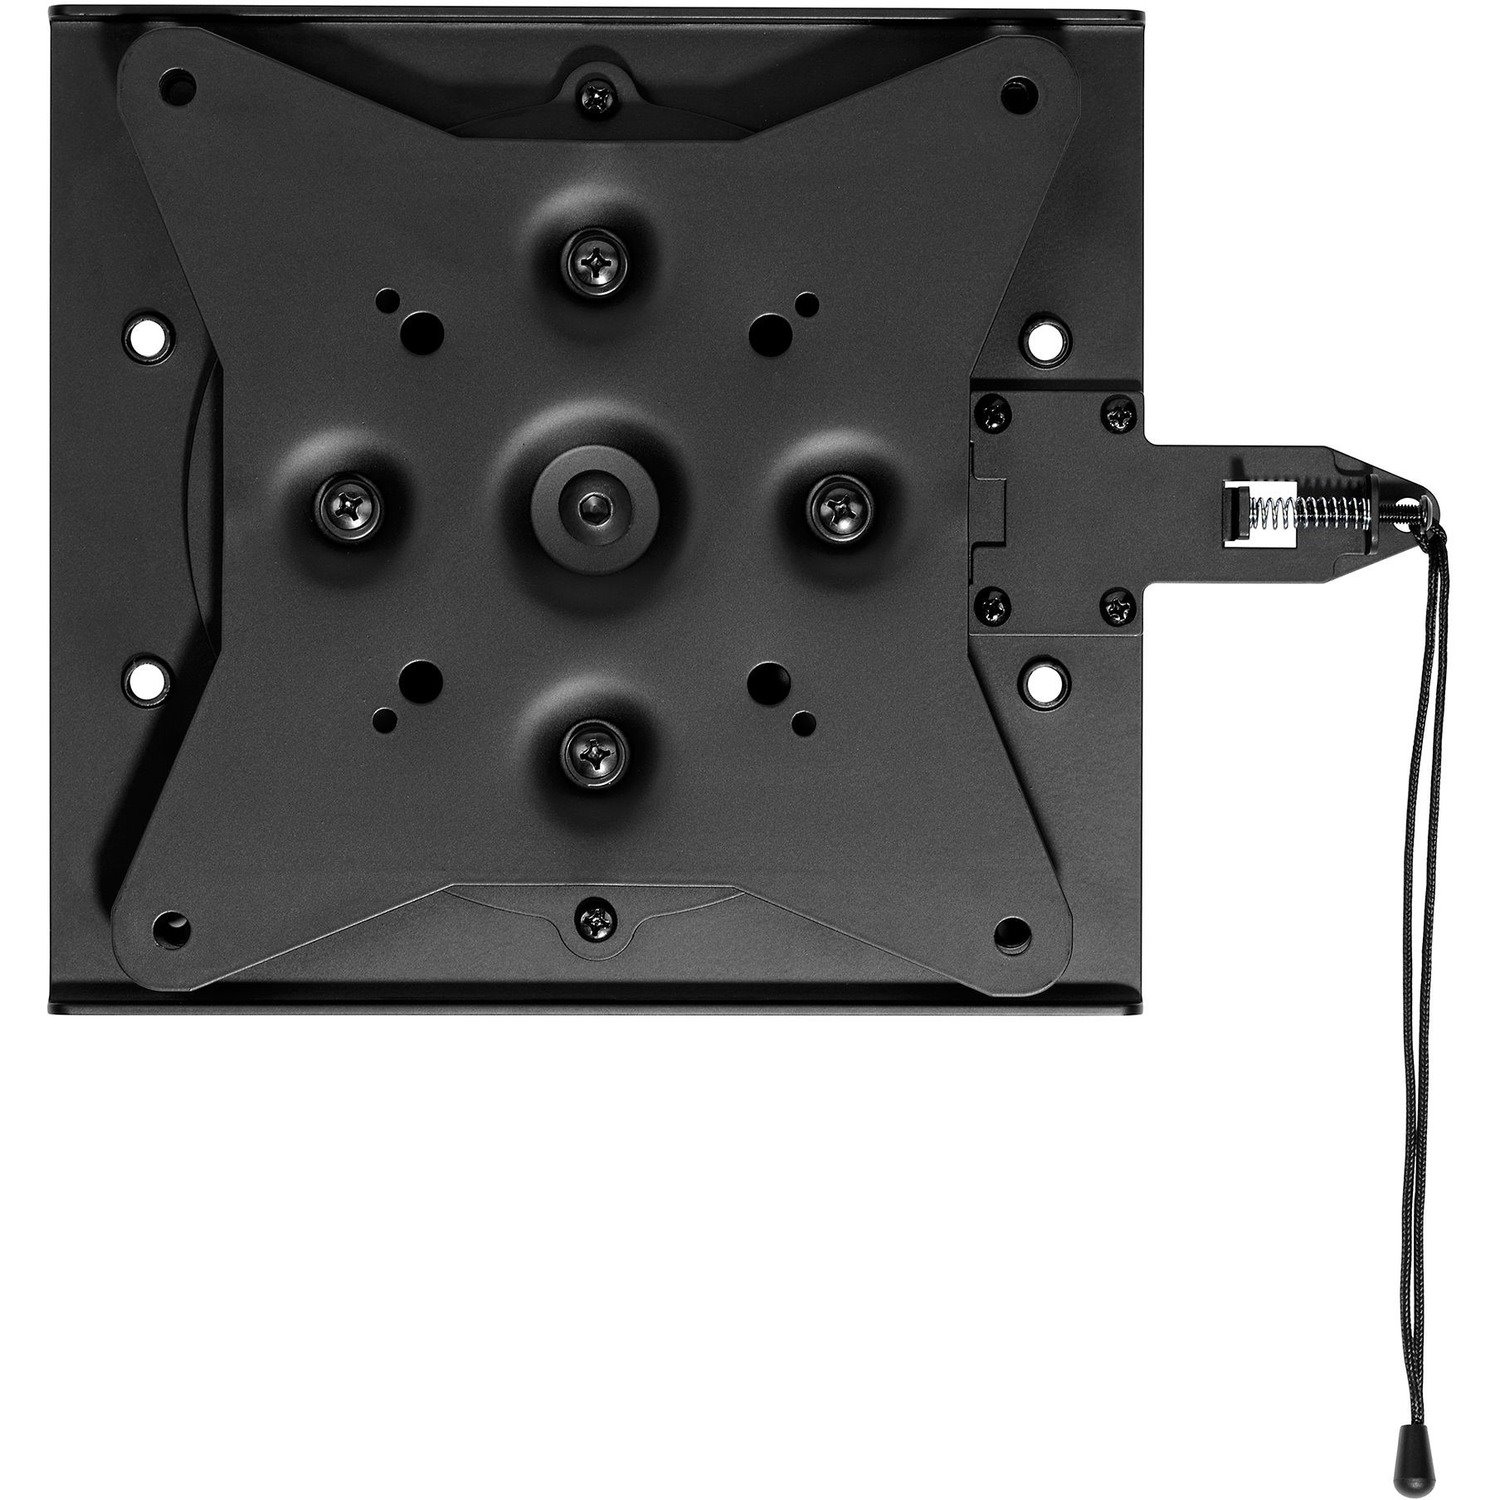 Peerless-AV RMI2W Mounting Adapter for Wall Mounting System, Cart, Display Stand, Display, Digital Signage Display - Black - Landscape/Portrait